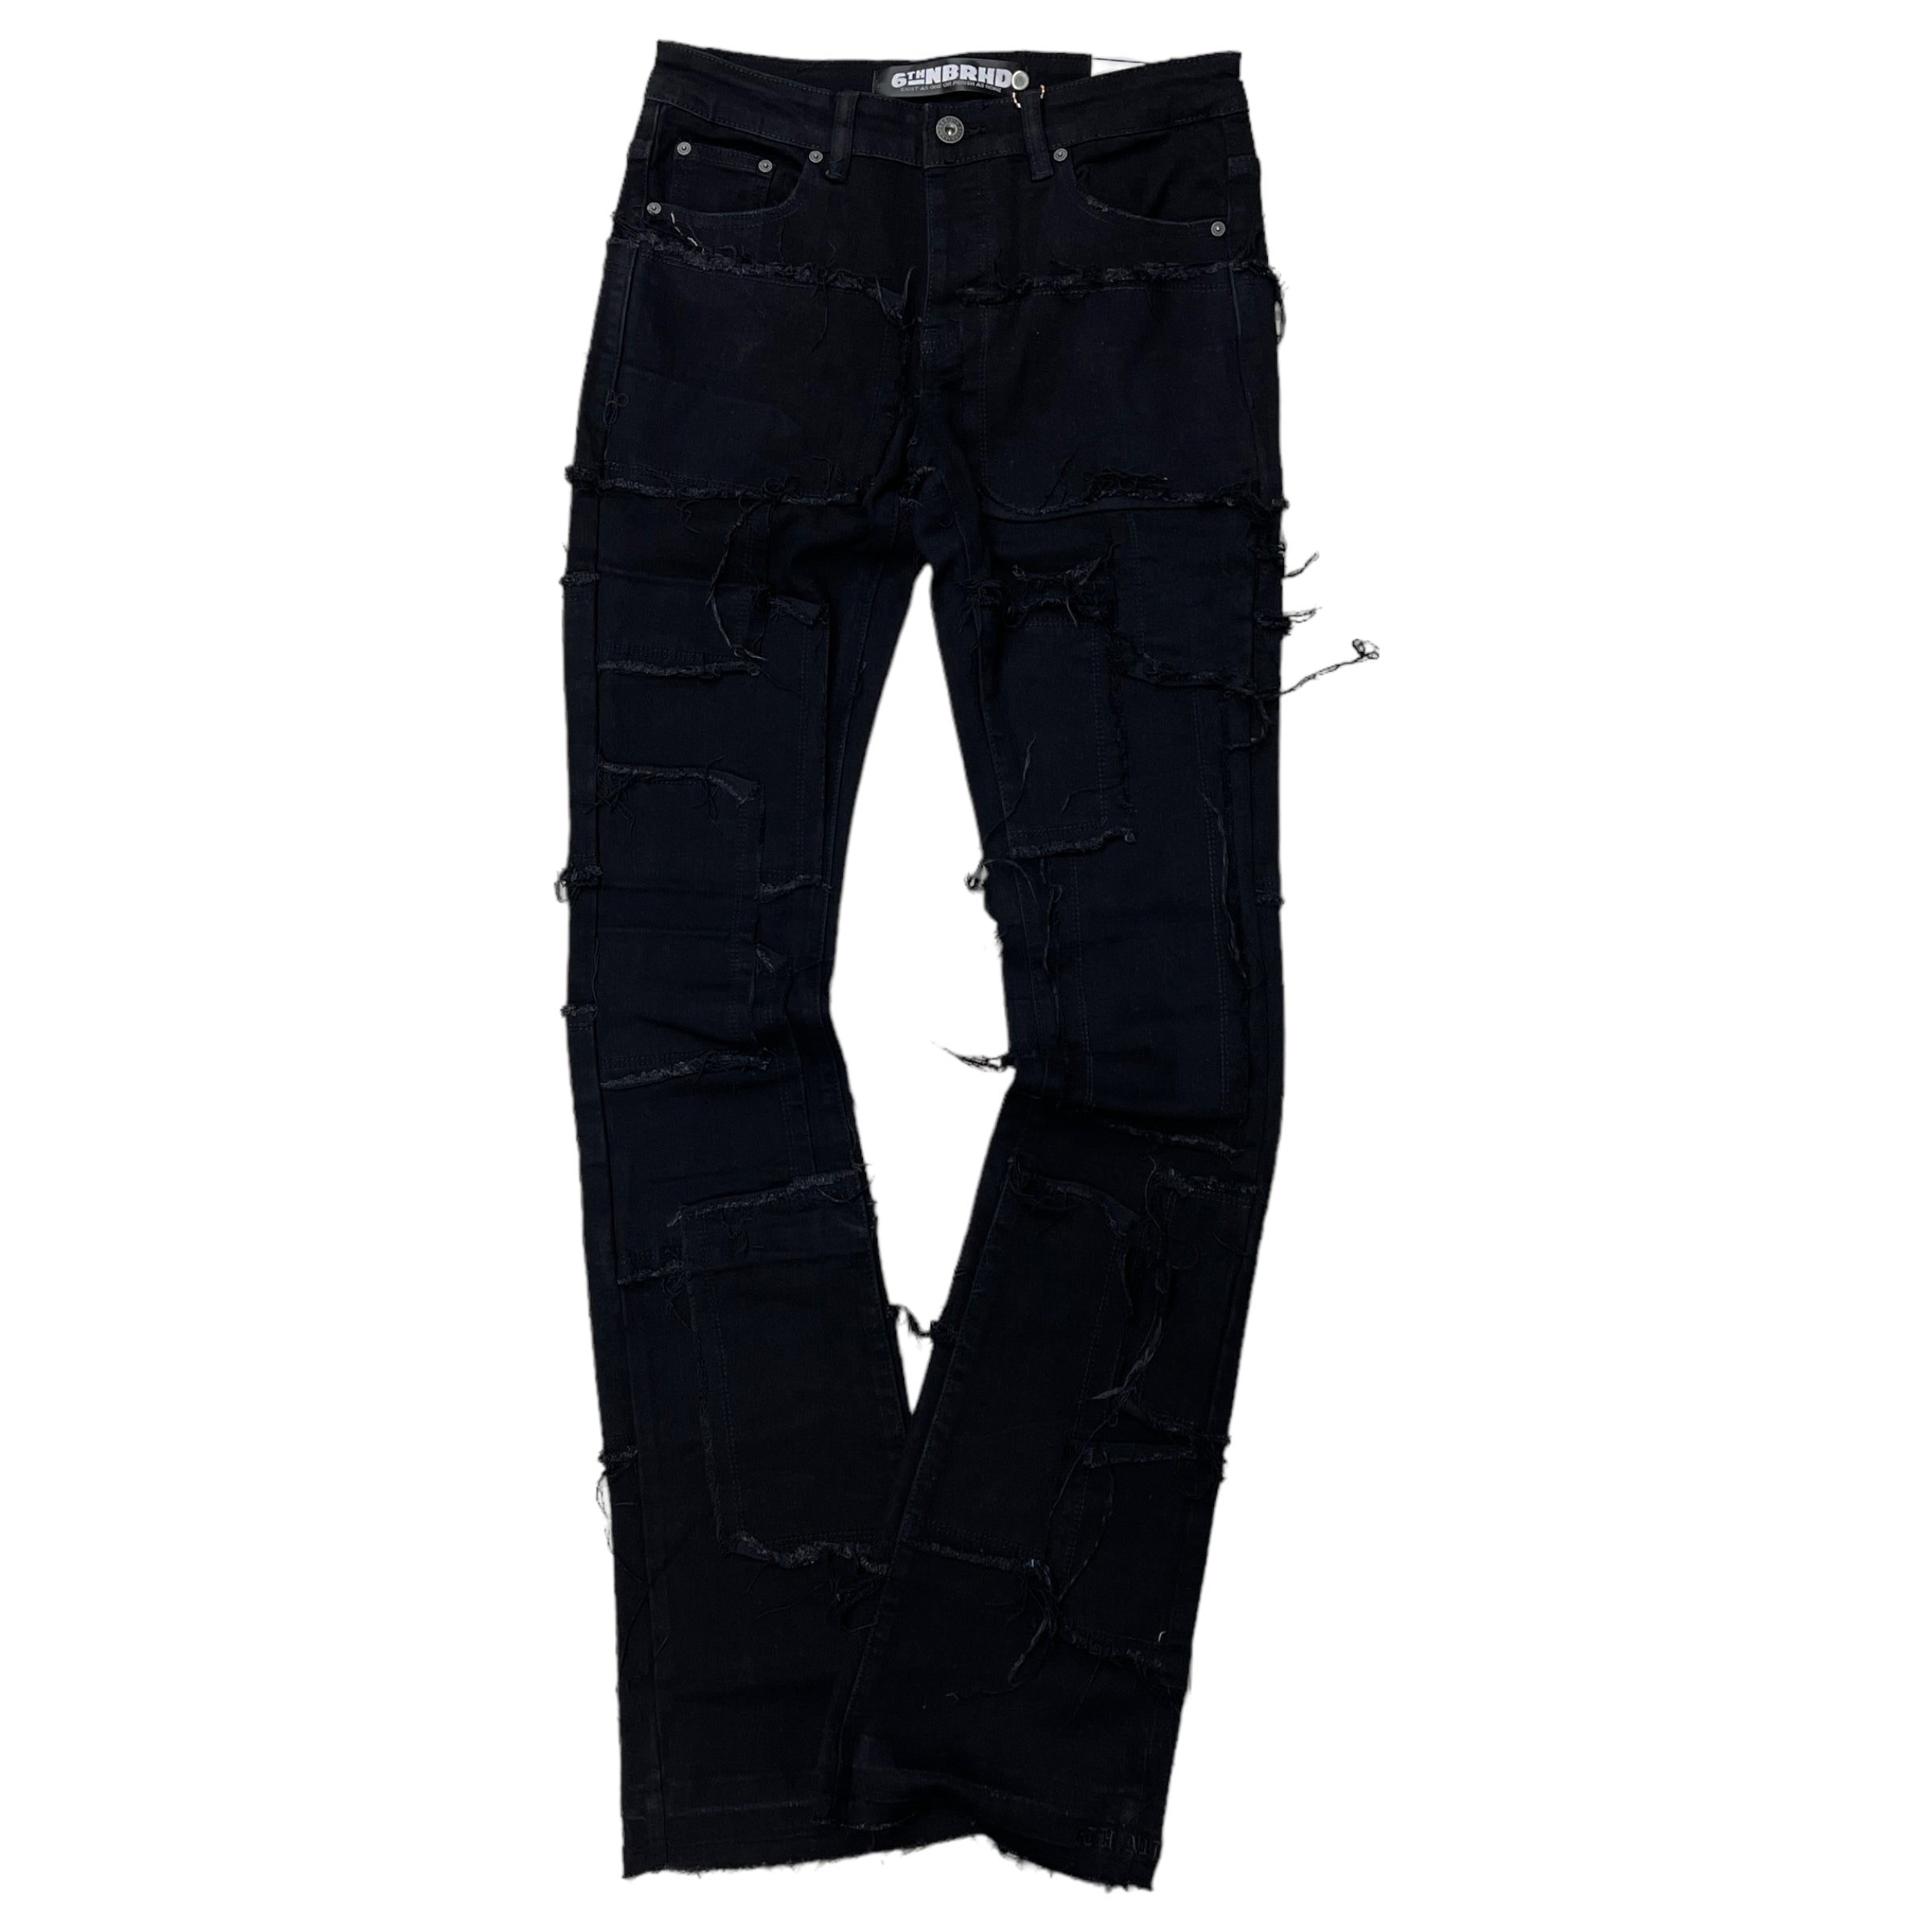 6TH NBRHD "Lupin" Flare Stacked Denim Black (T)